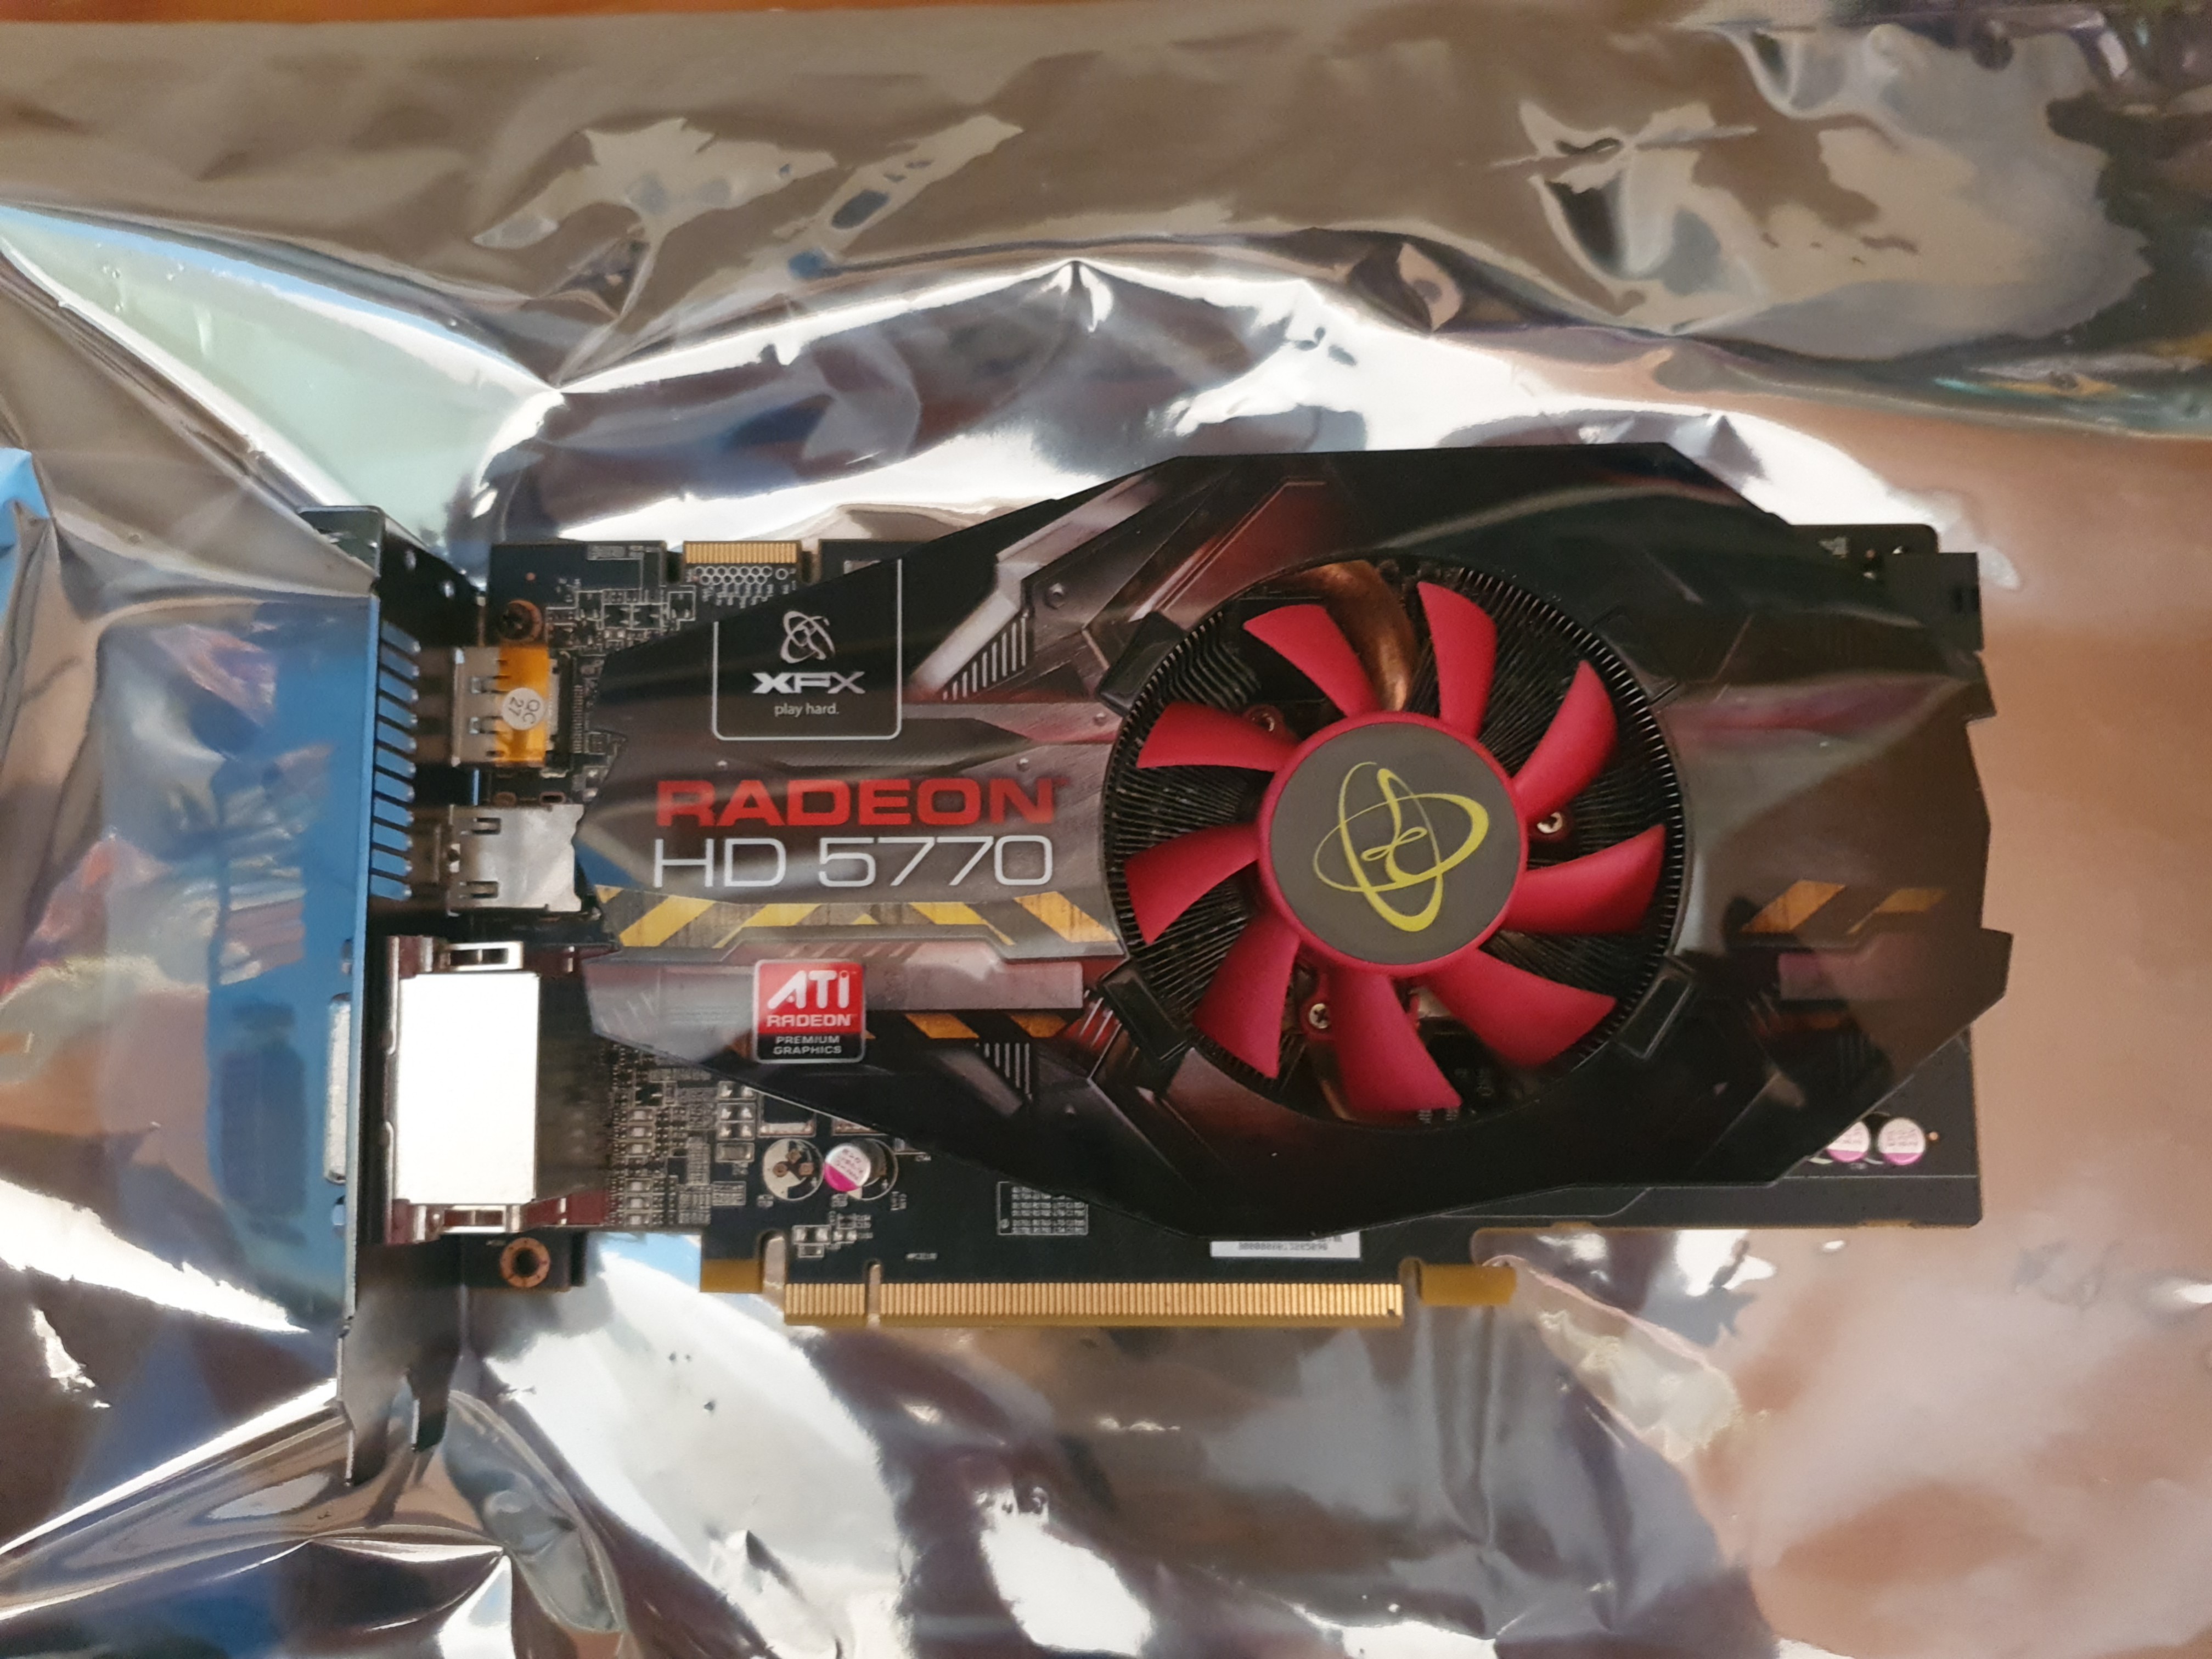 Xfx Radeon Hd 5770 Computers Tech Parts Accessories Computer Parts On Carousell